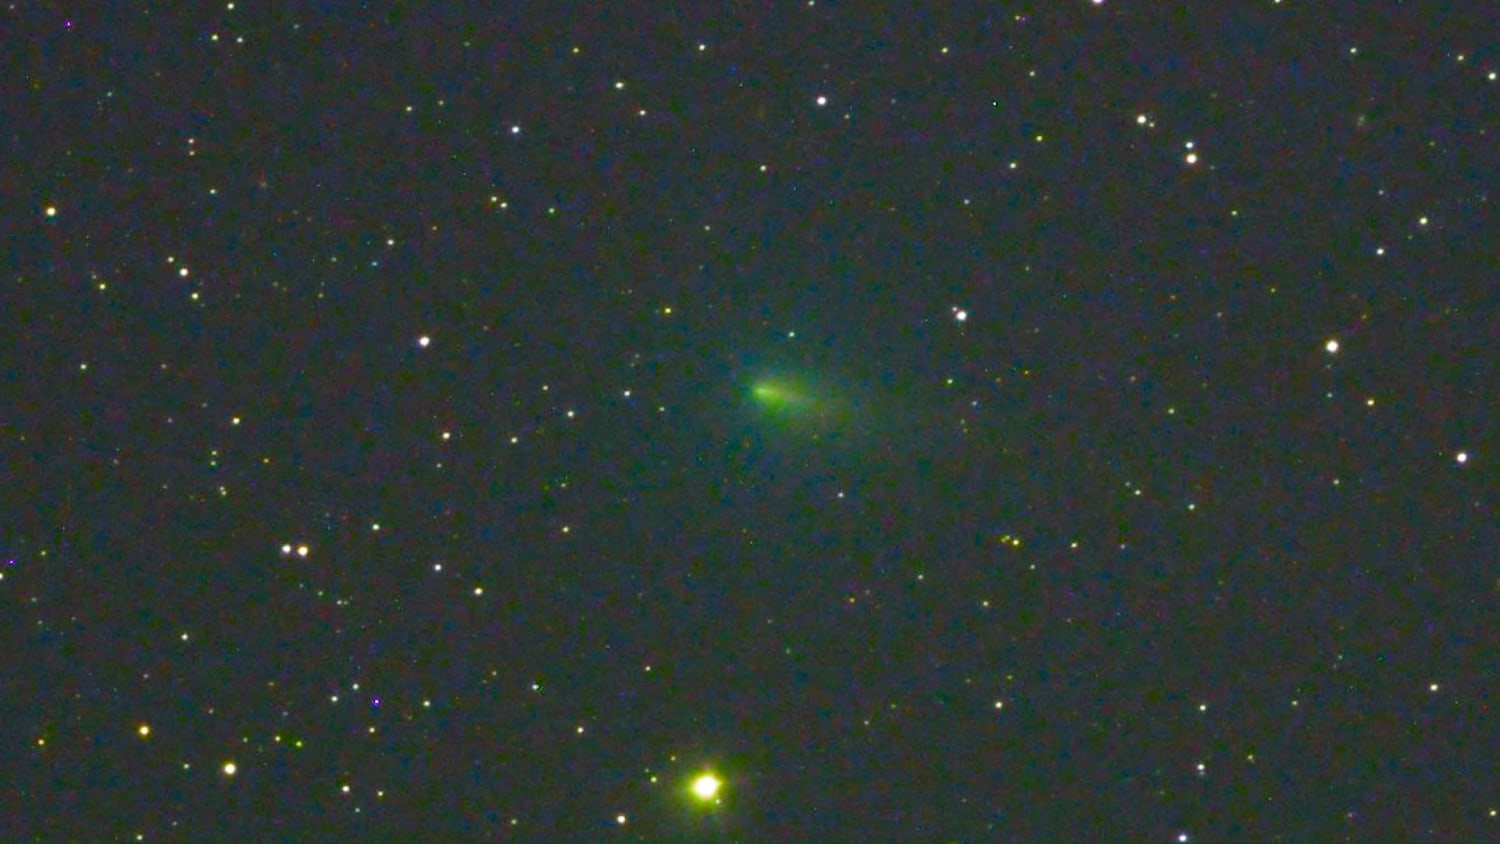 I took a picture of Comet Atlas on April 8th and made a short movie. When I was processing I noticed I was not able to select the nucleus. 2 weeks ago, I was able to select. It seems it is disintegrating as it approaching the sun. I have YouTube Video link in the comments if you are interested.